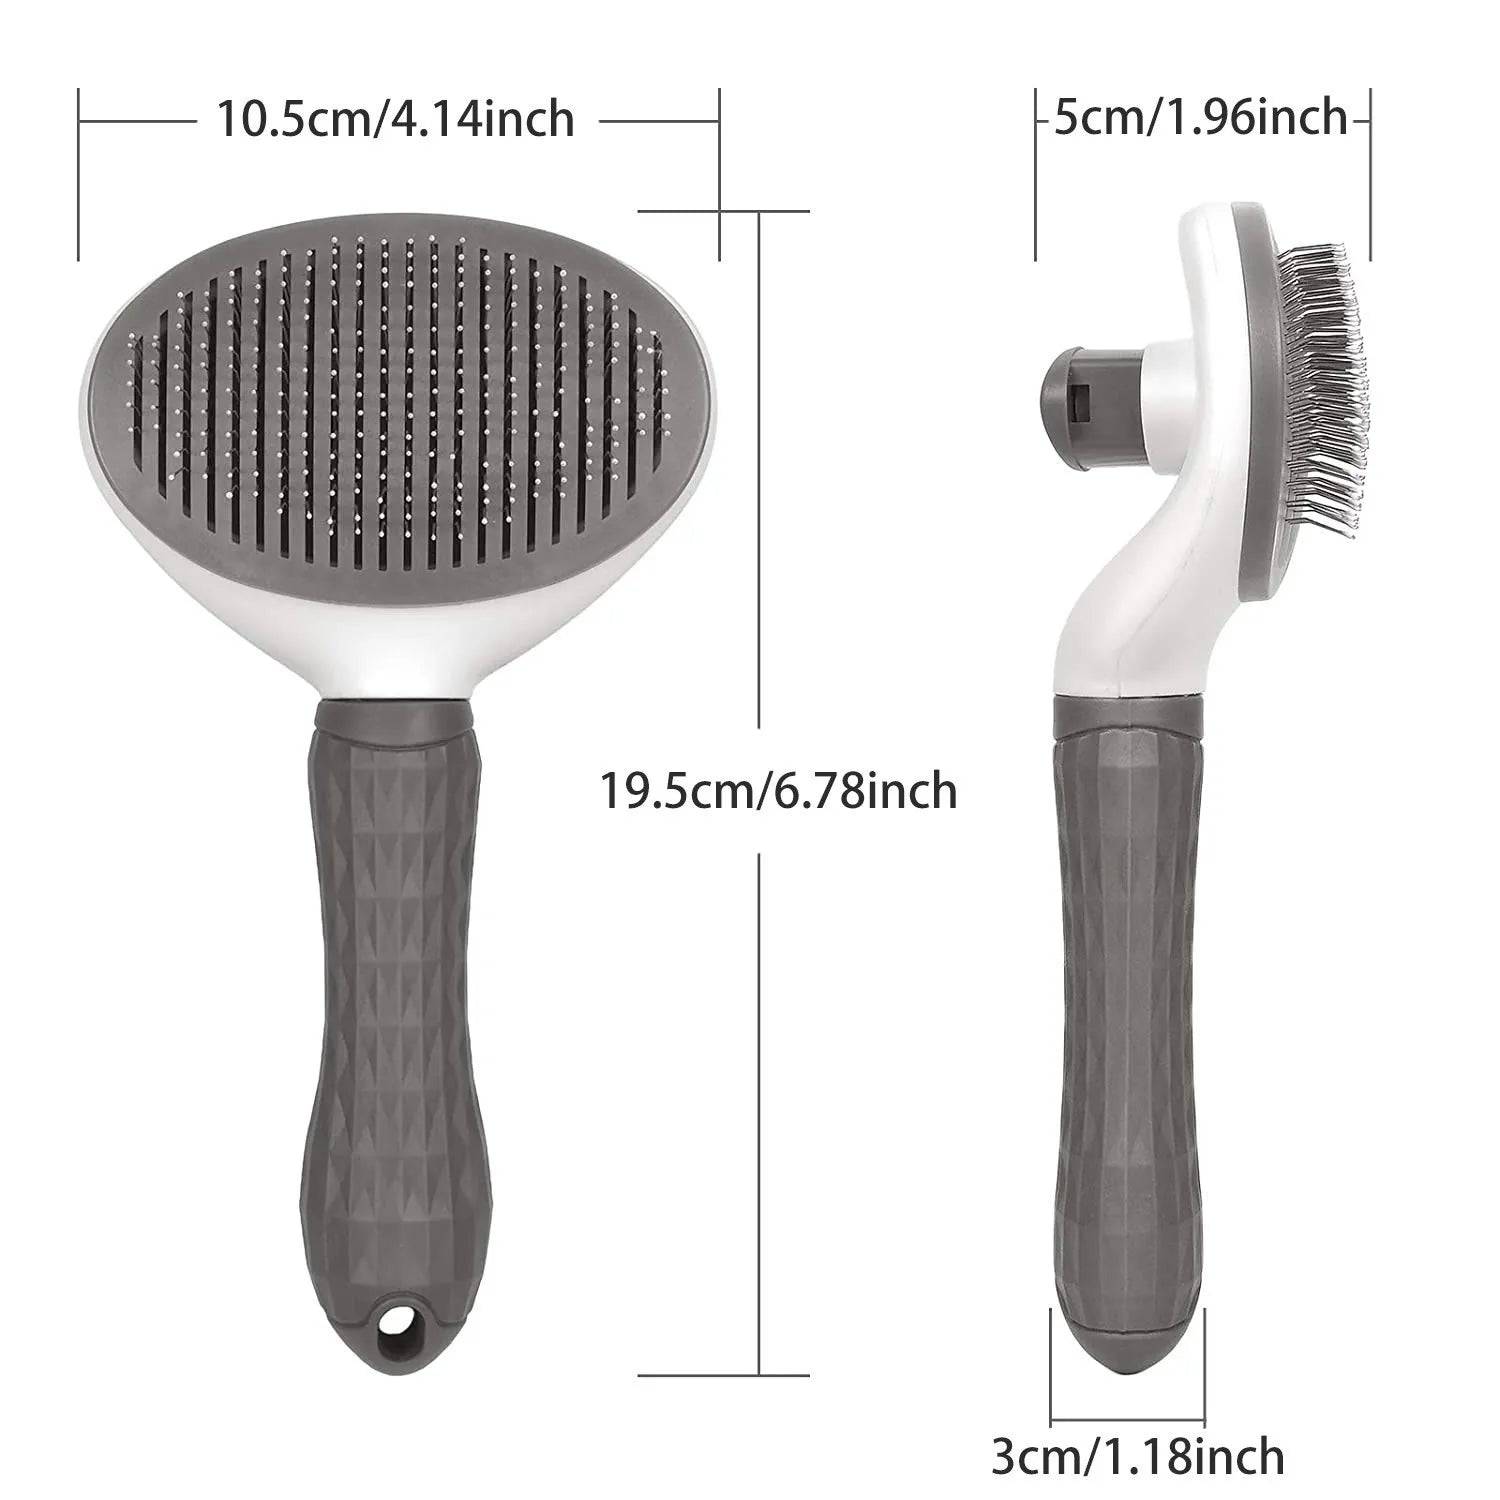 Self-cleaning pet hair remover brush: grooming tool for dogs and cats - dematting comb - IHavePaws